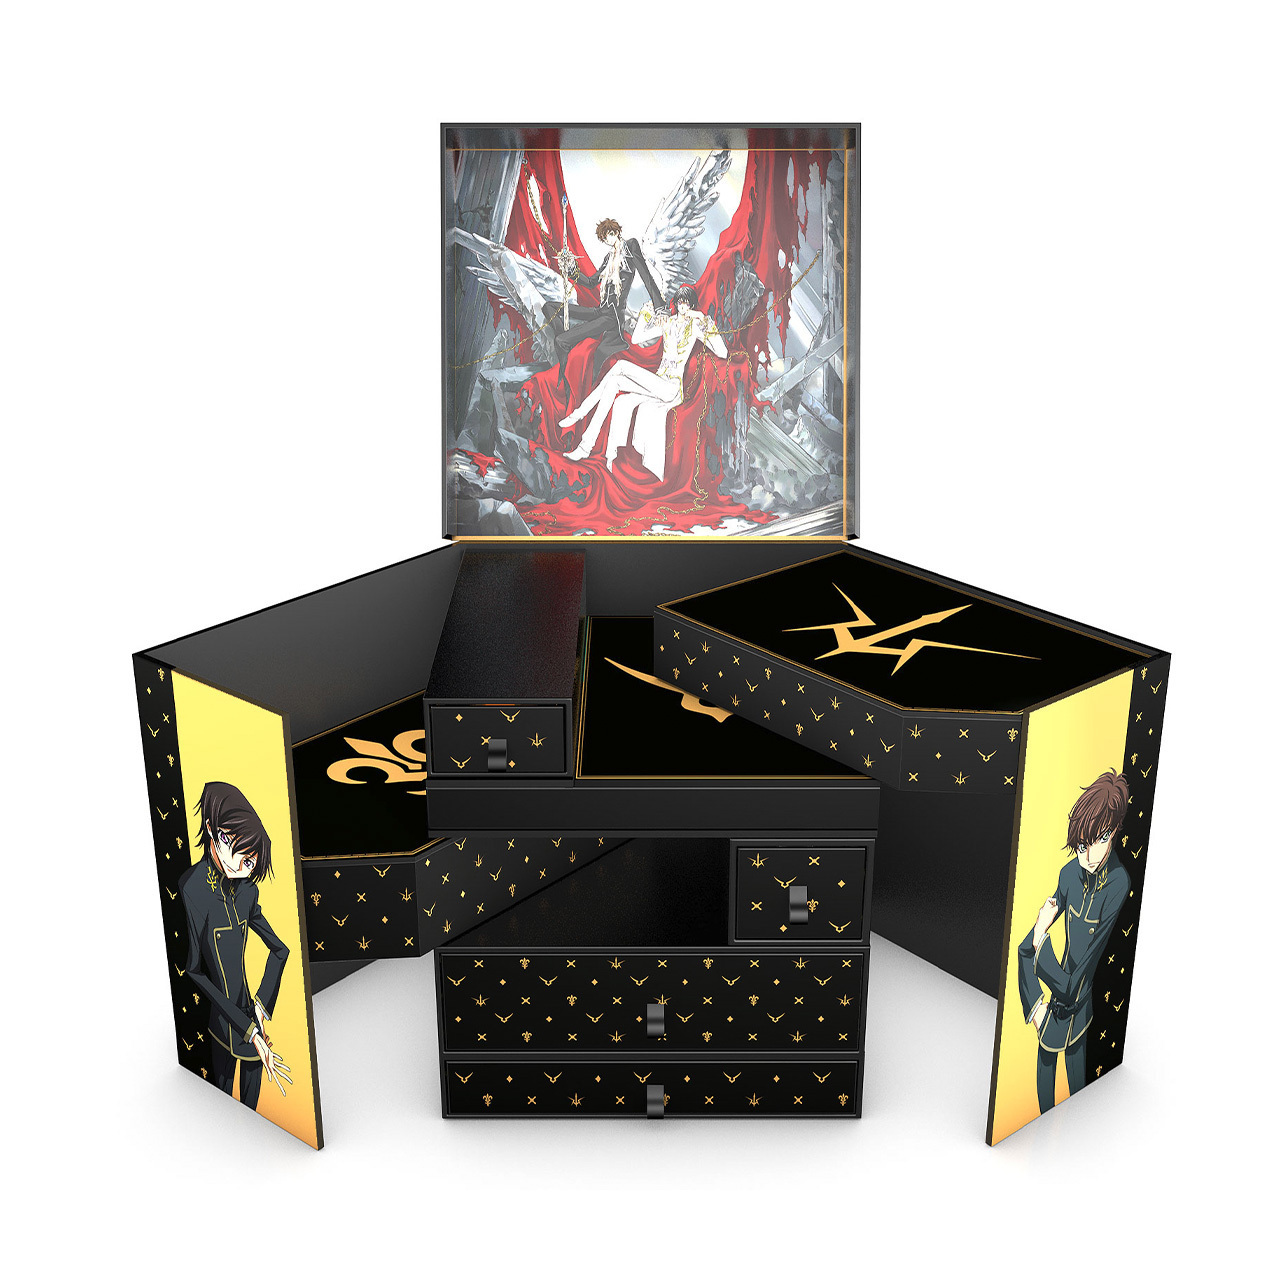 Cool Stuff: The Code Geass Anime Box Set Is Worthy Of The Black Knights